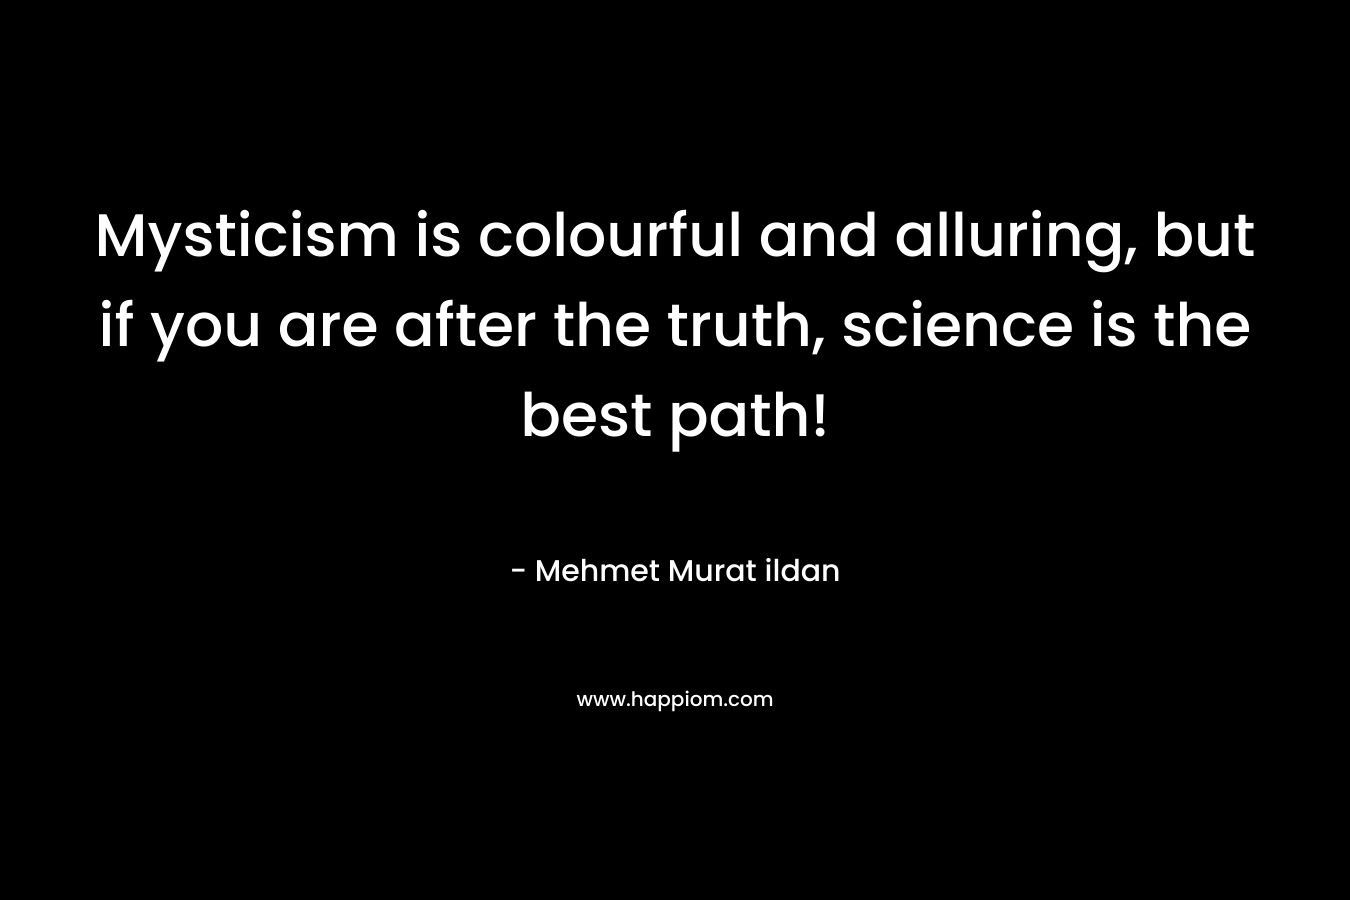 Mysticism is colourful and alluring, but if you are after the truth, science is the best path!